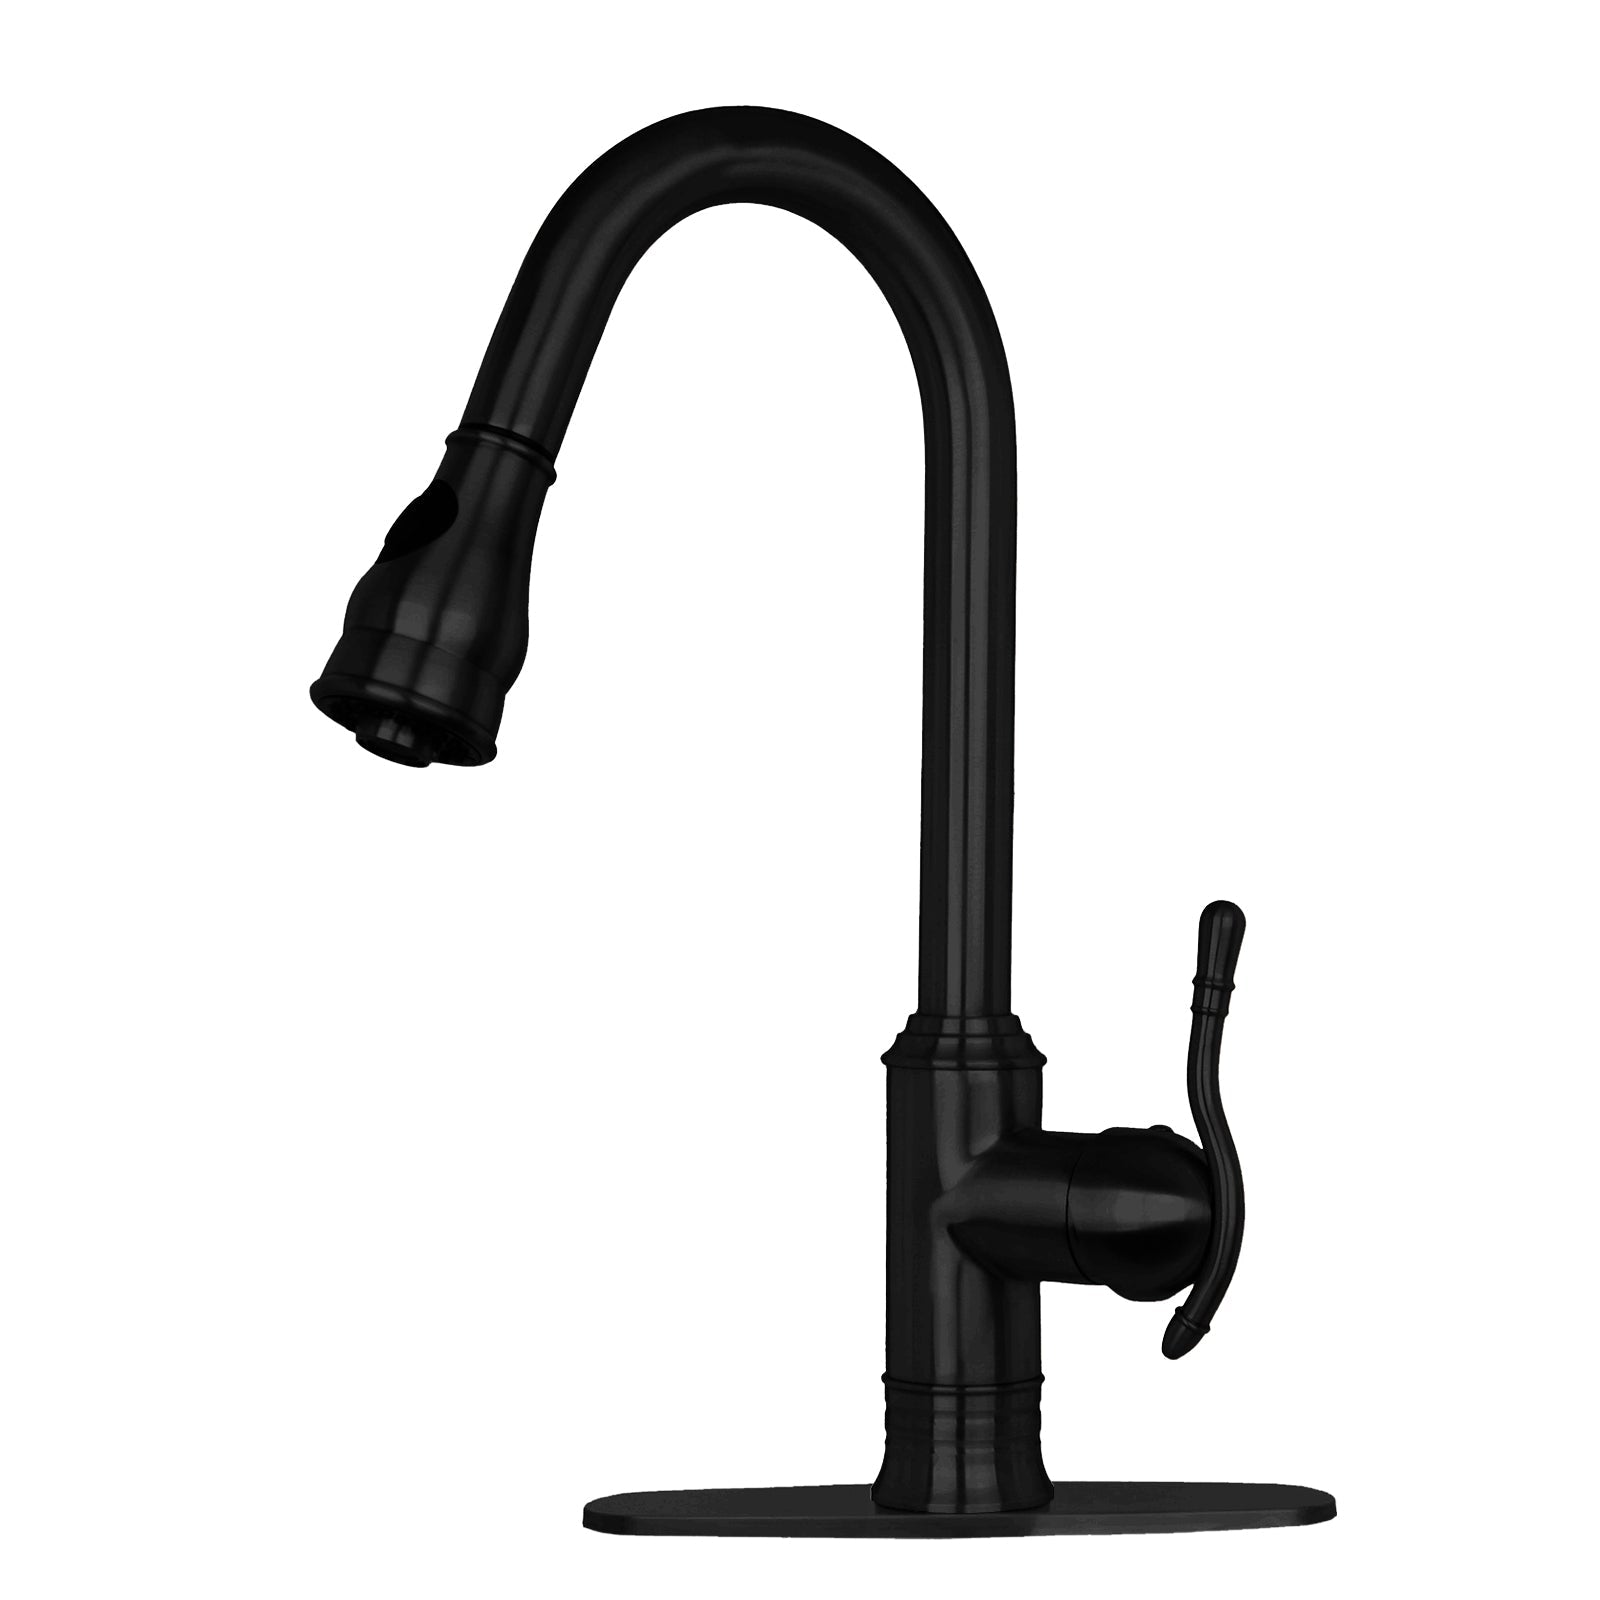 Antique Bronze Pull Out Kitchen Faucet, Single Level Solid Brass Kitchen Sink Faucets with Pull Down Sprayer - AK96415-D-AB